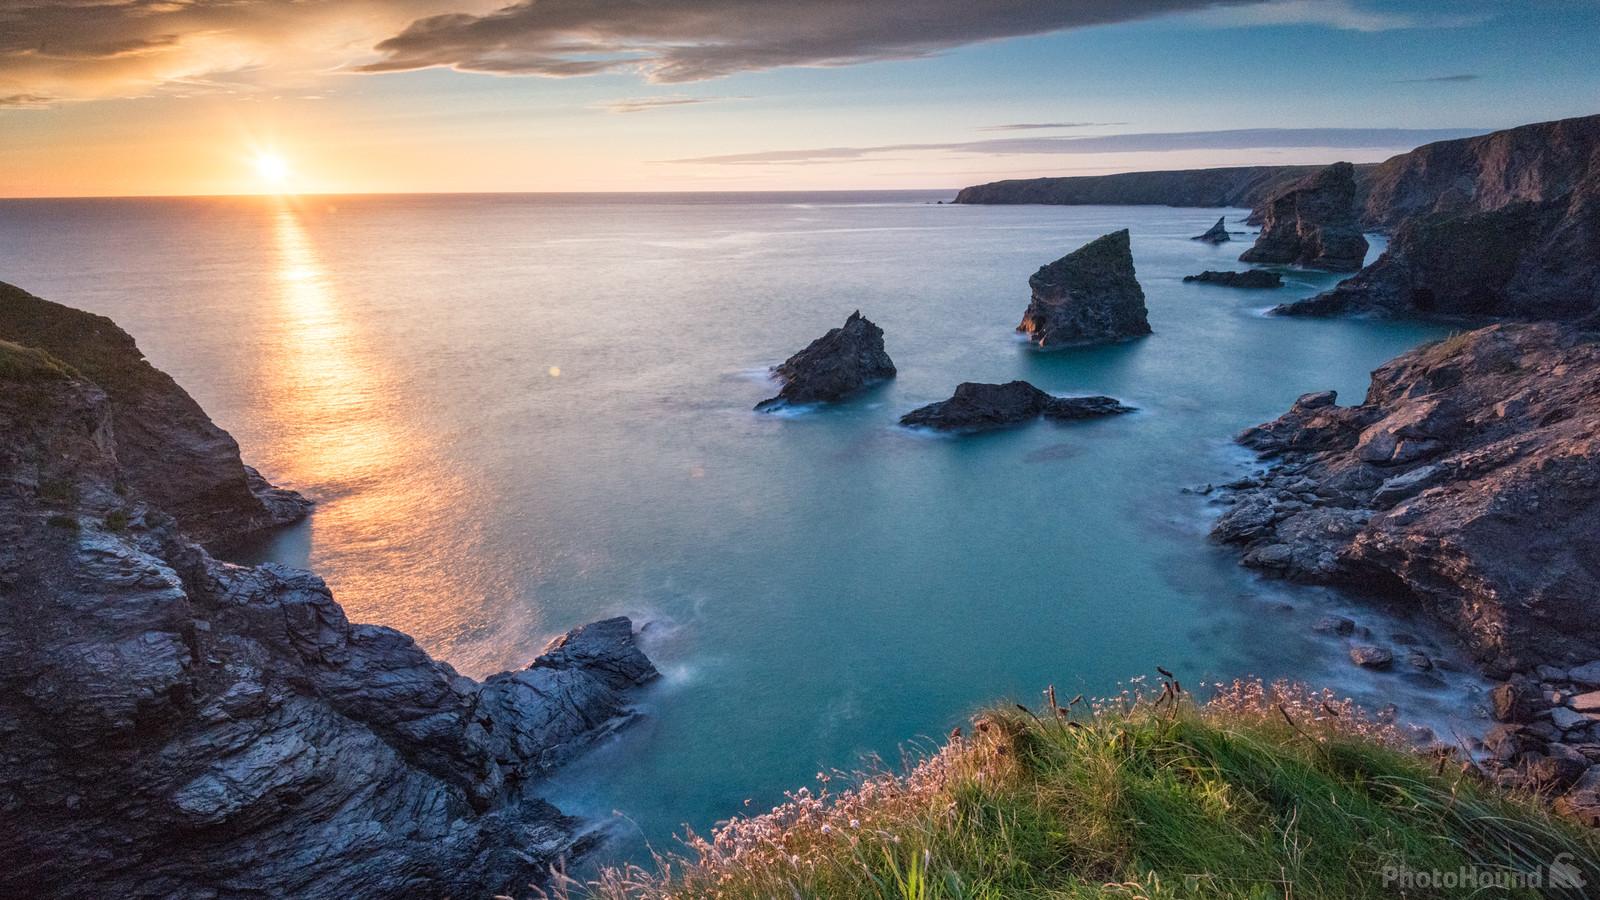 Image of Bedruthan steps by Richard Lizzimore